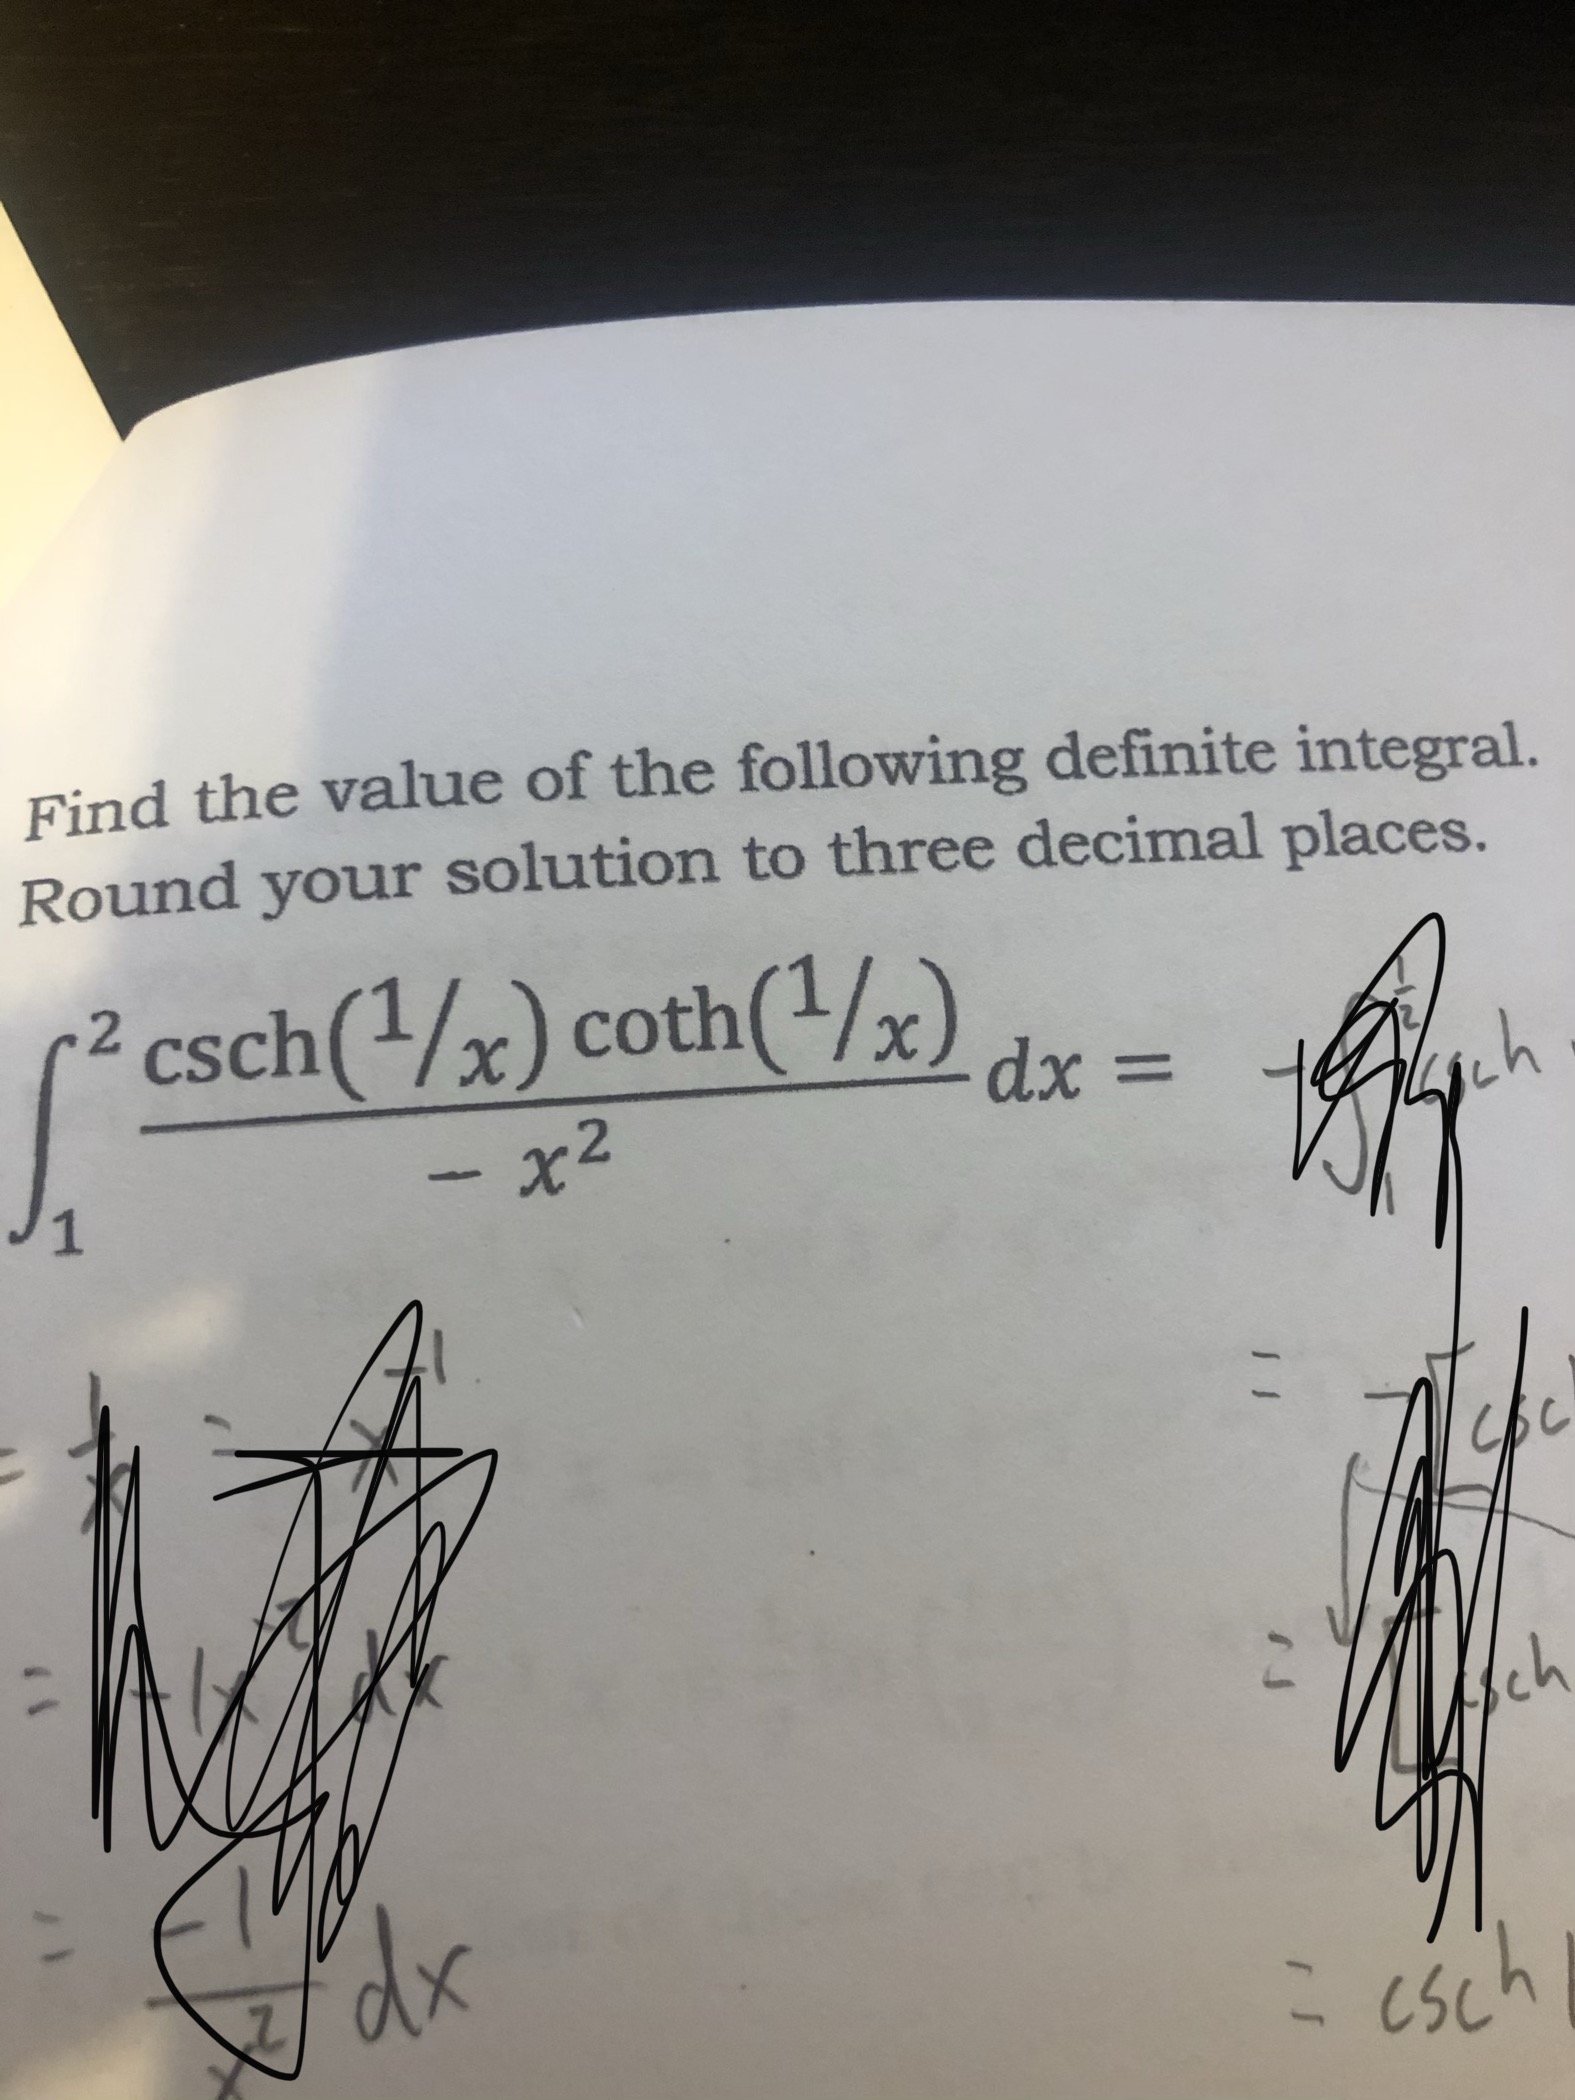 Find the value of the following definite integral
Round your solution to three decimal places.
-2 csch(/x) coth(/x)
dx =
ich
%3D
x2
